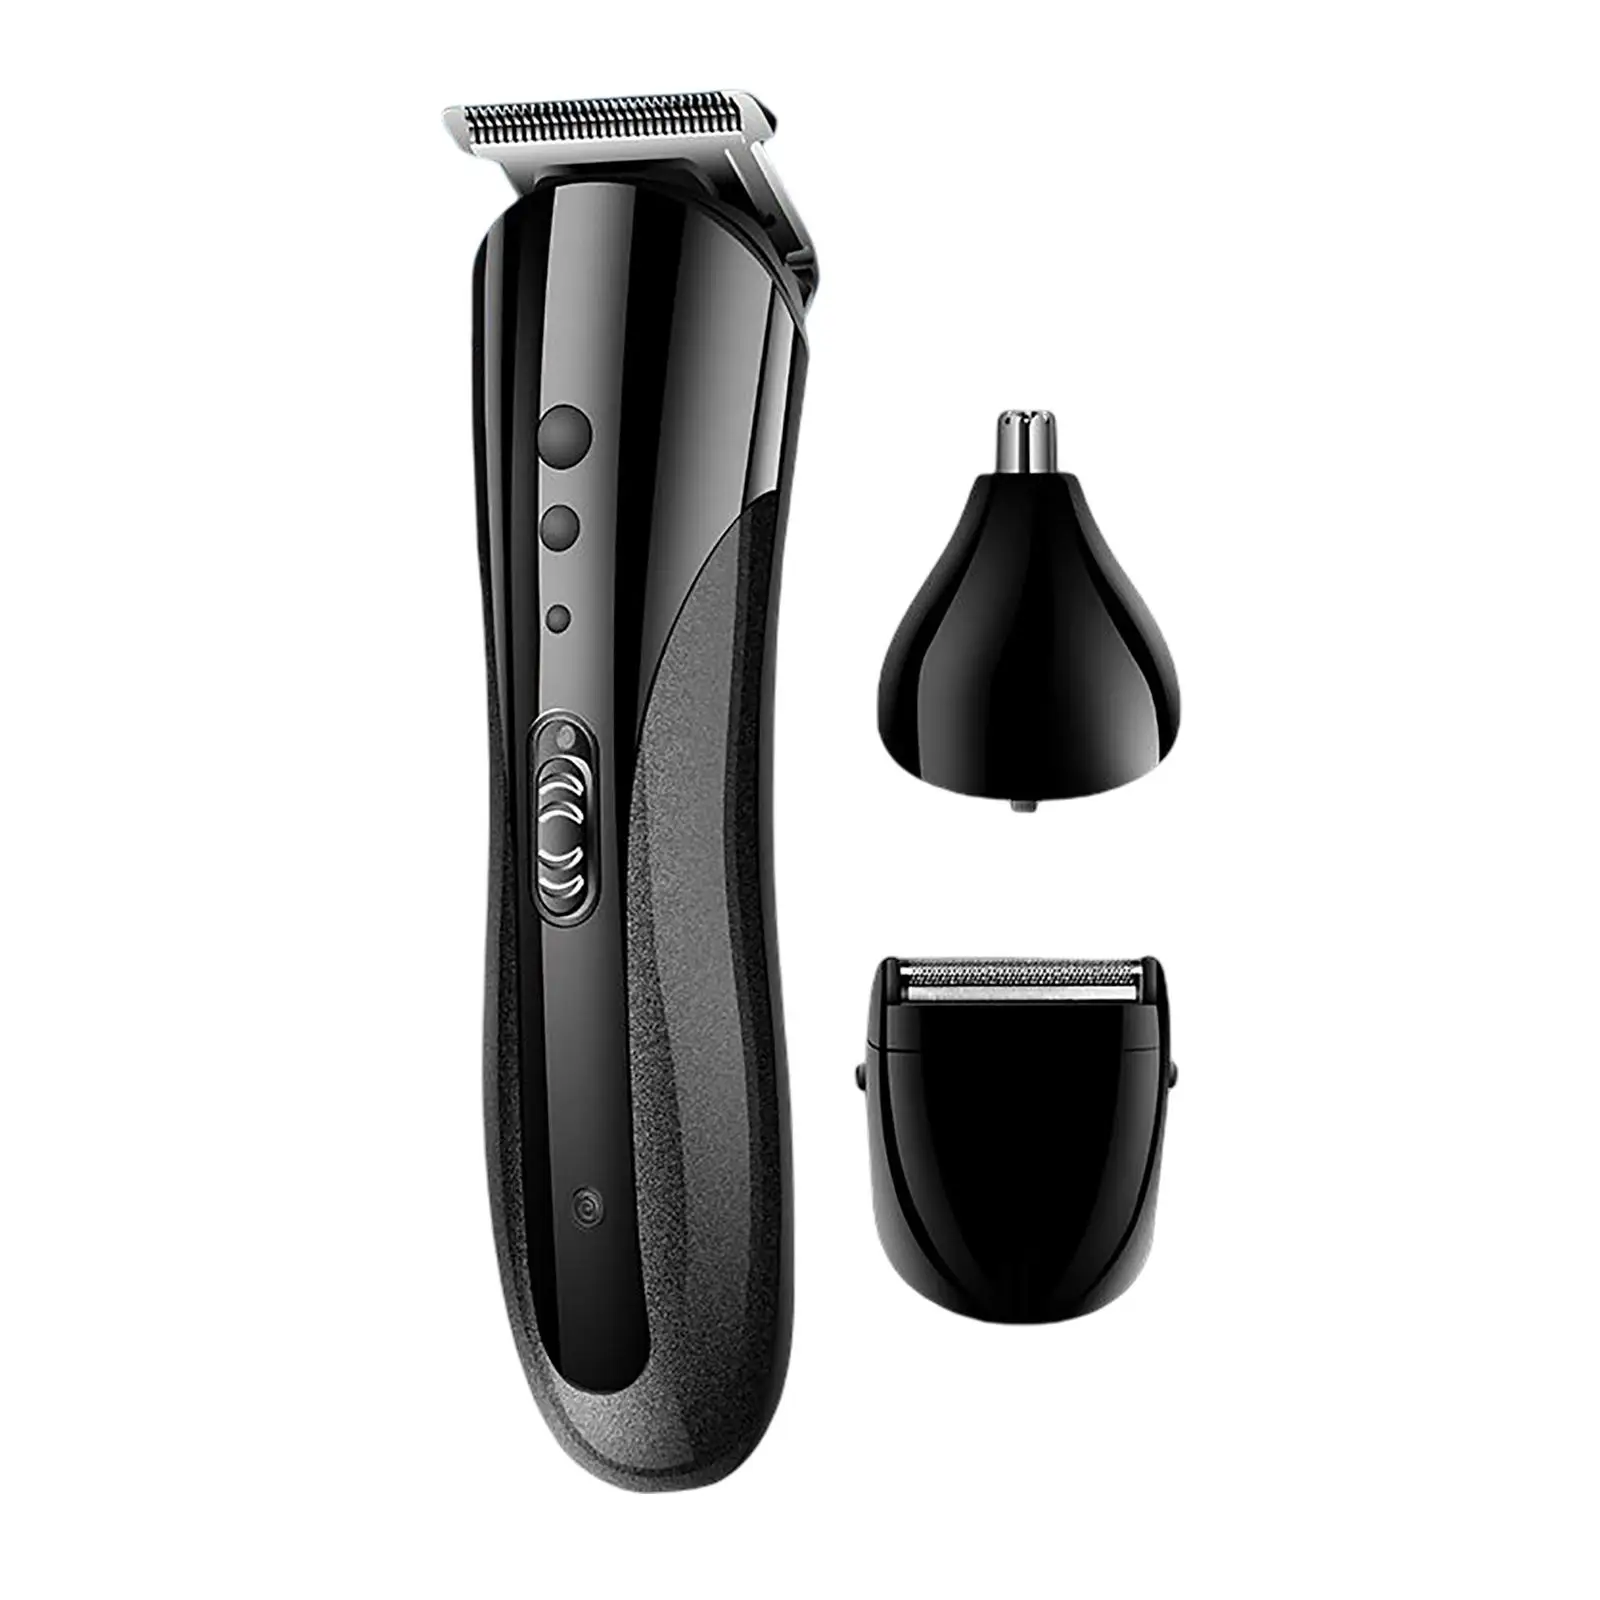 Hair Clippers Trimmer USB Charging Carbon Steel Hair Cutting Hair Grooming Barber Tool Men Gifts EU